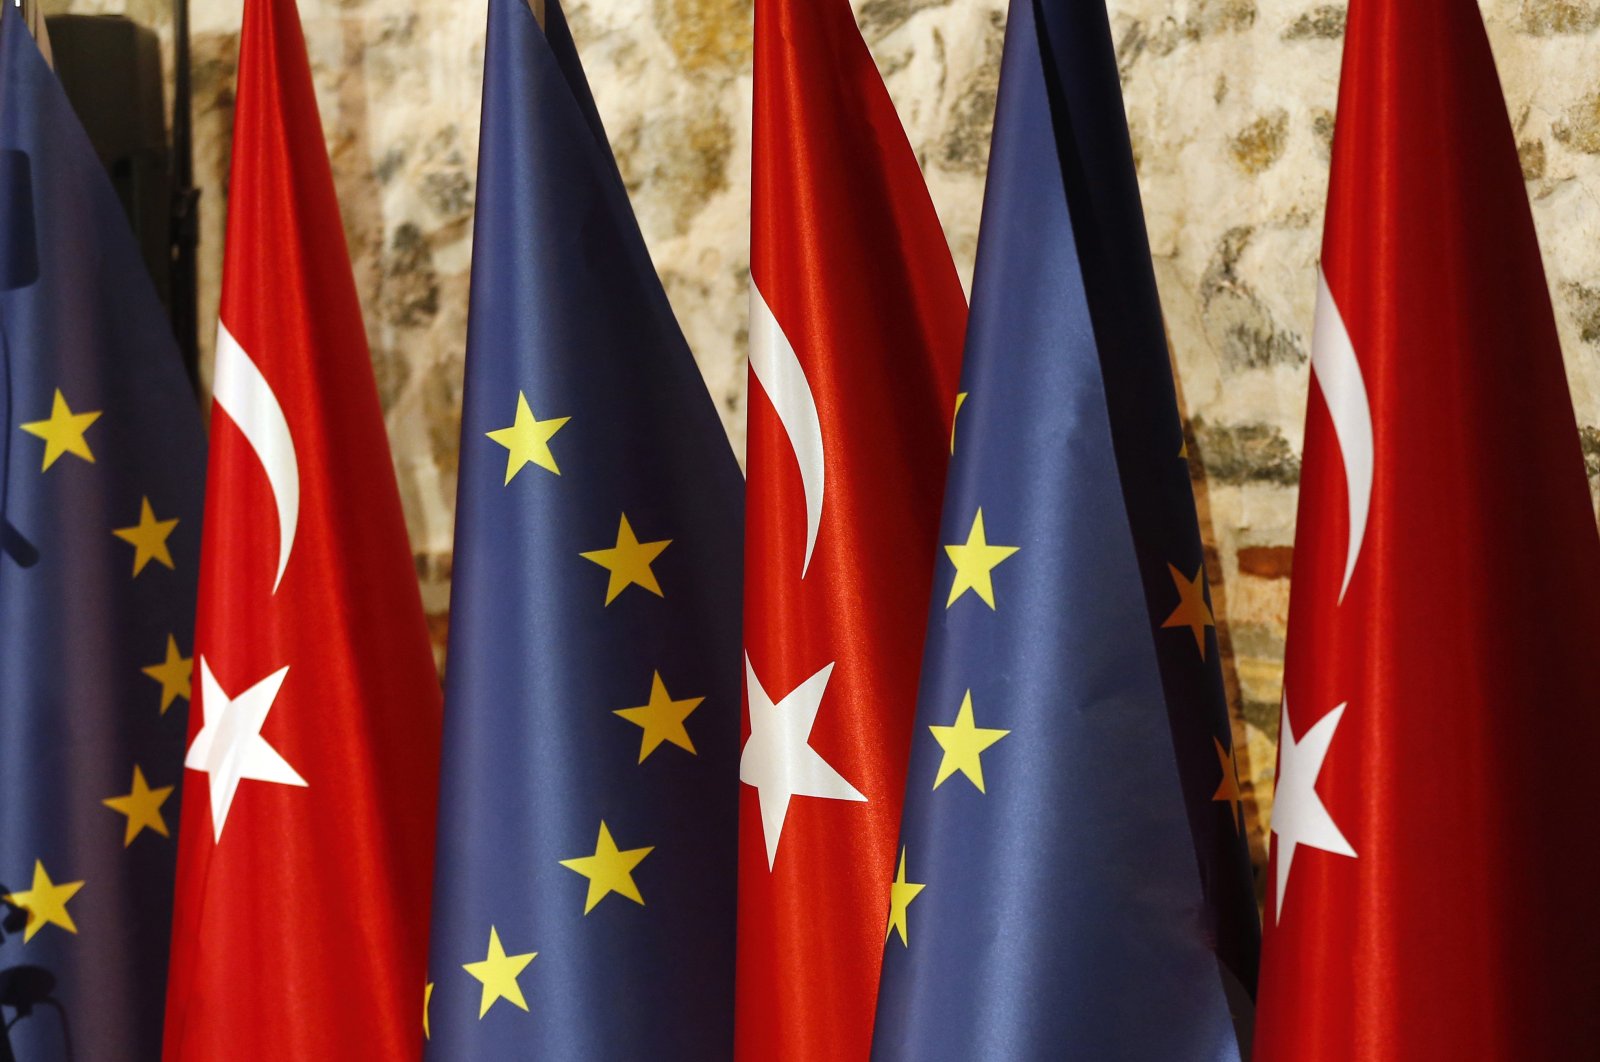 Turkish and European flags prior to the opening session of a high-level meeting between EU and Turkey, in Istanbul, Turkey, Feb. 28, 2019. (AP File Photo)